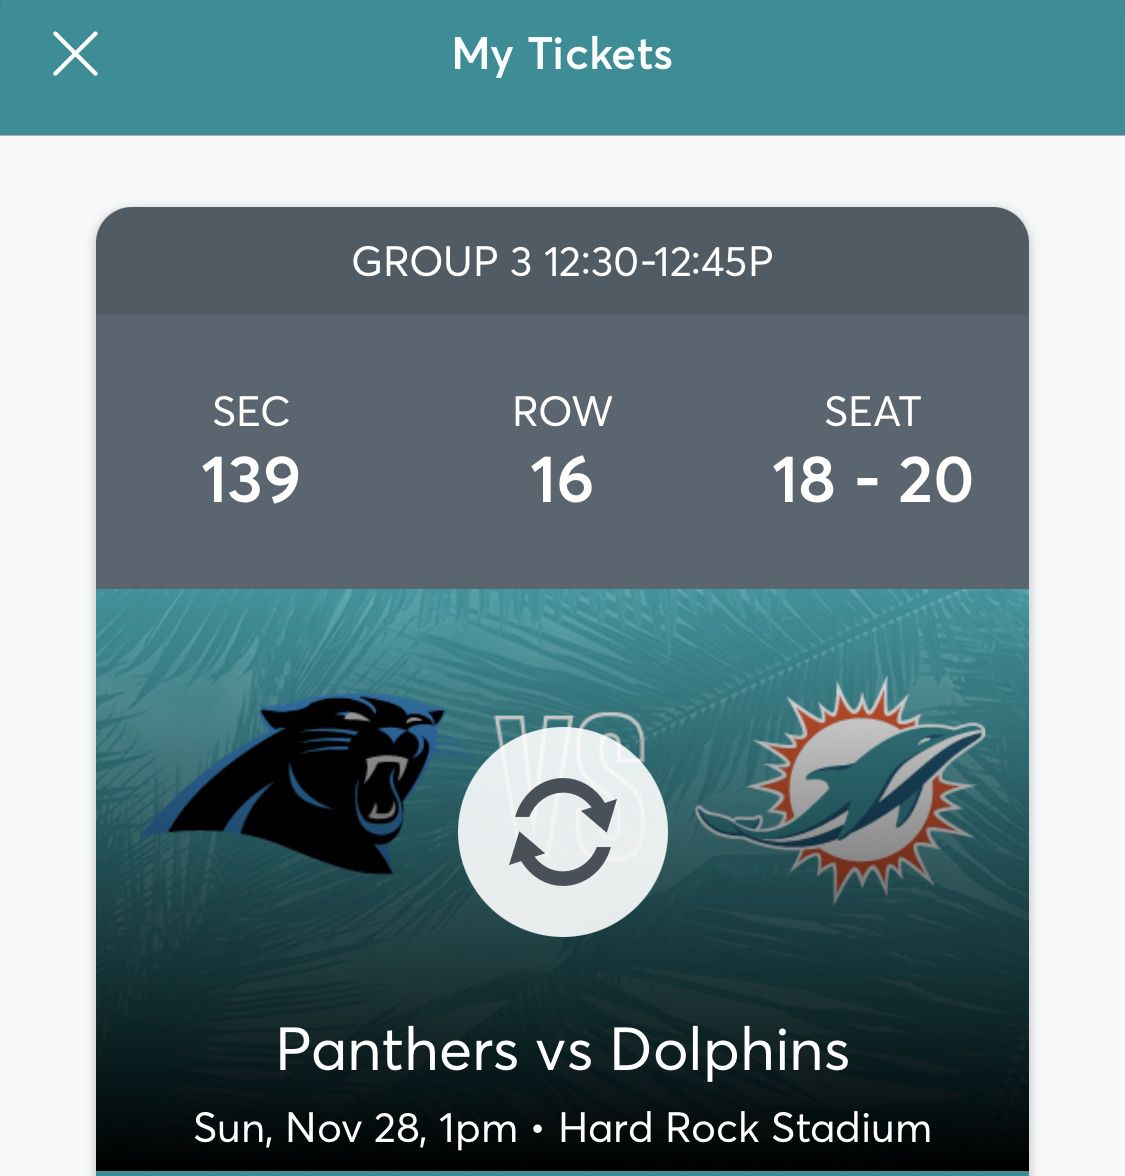 Miami Dolphins Vs  Panthers, 3 Tickets